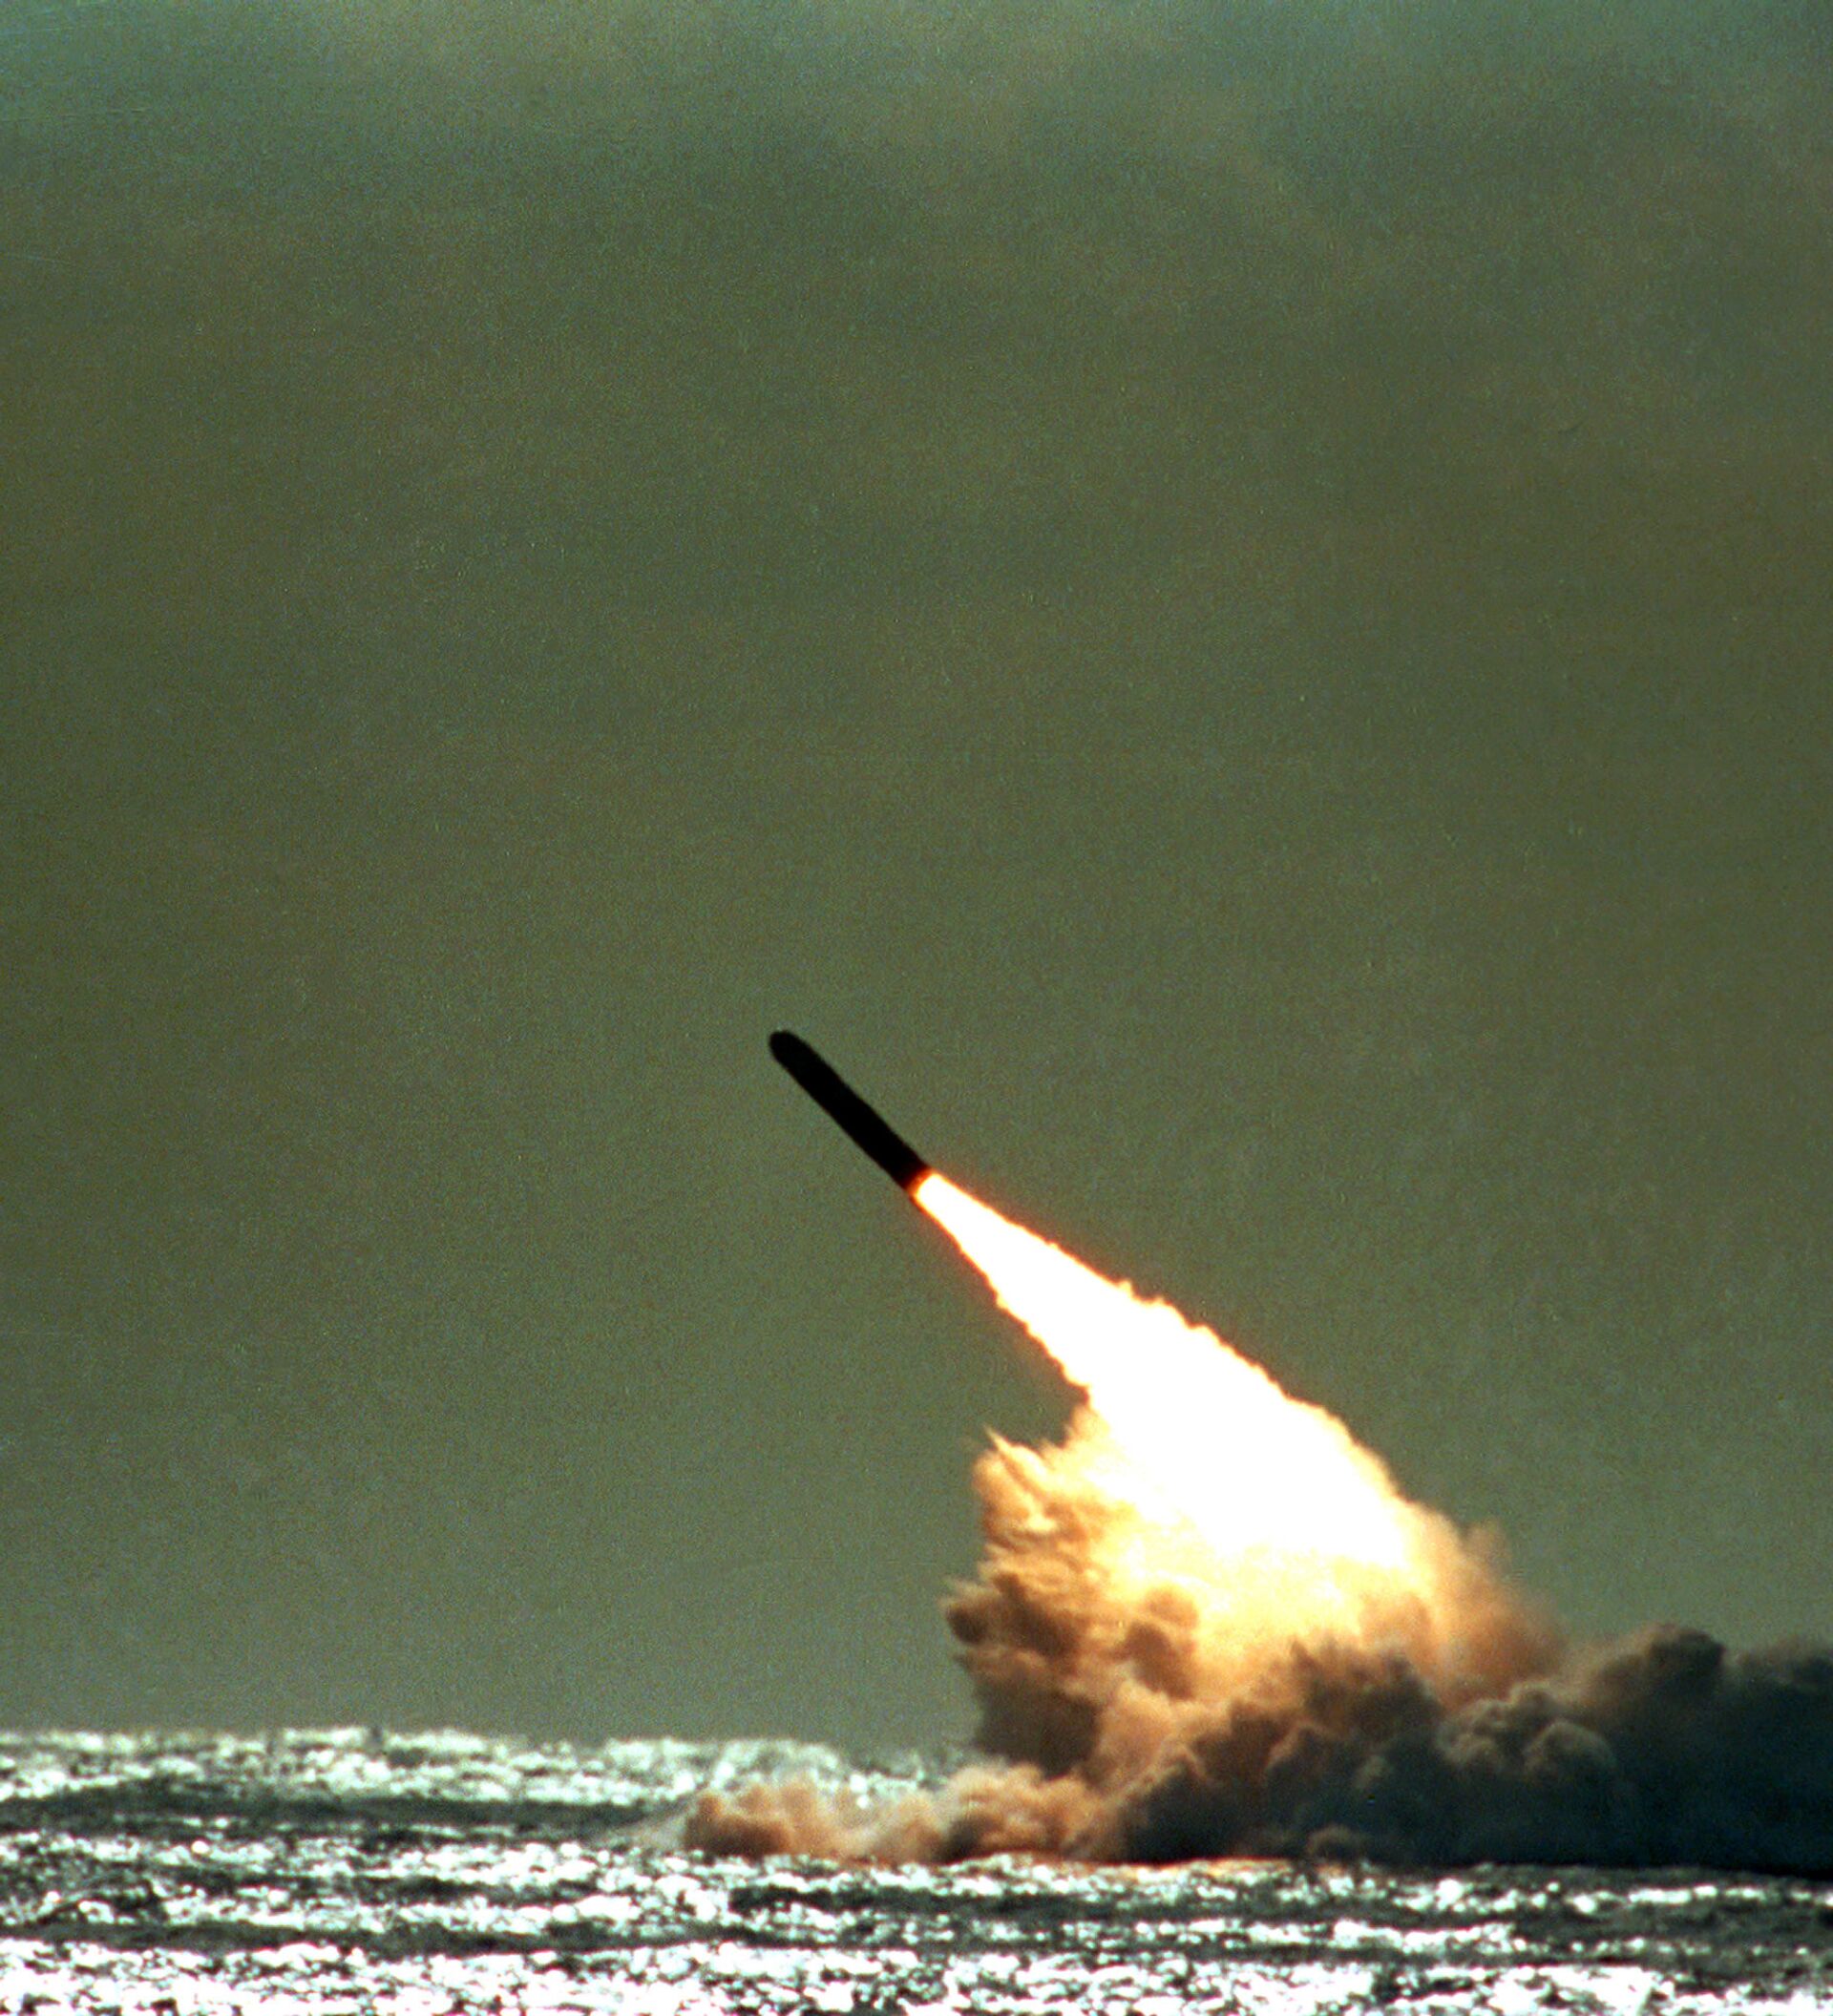 The USA produced the first modernized nuclear warhead W88 Alteration 370  for the Trident II D5 SLBM